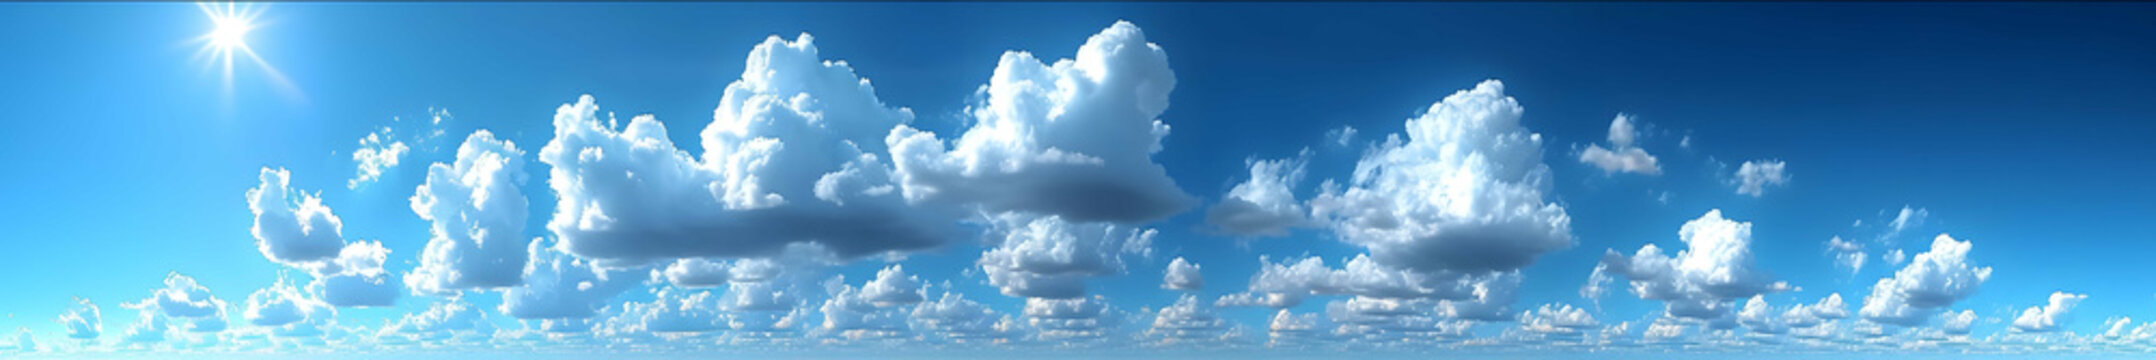 panoramic blue sky background with many clouds